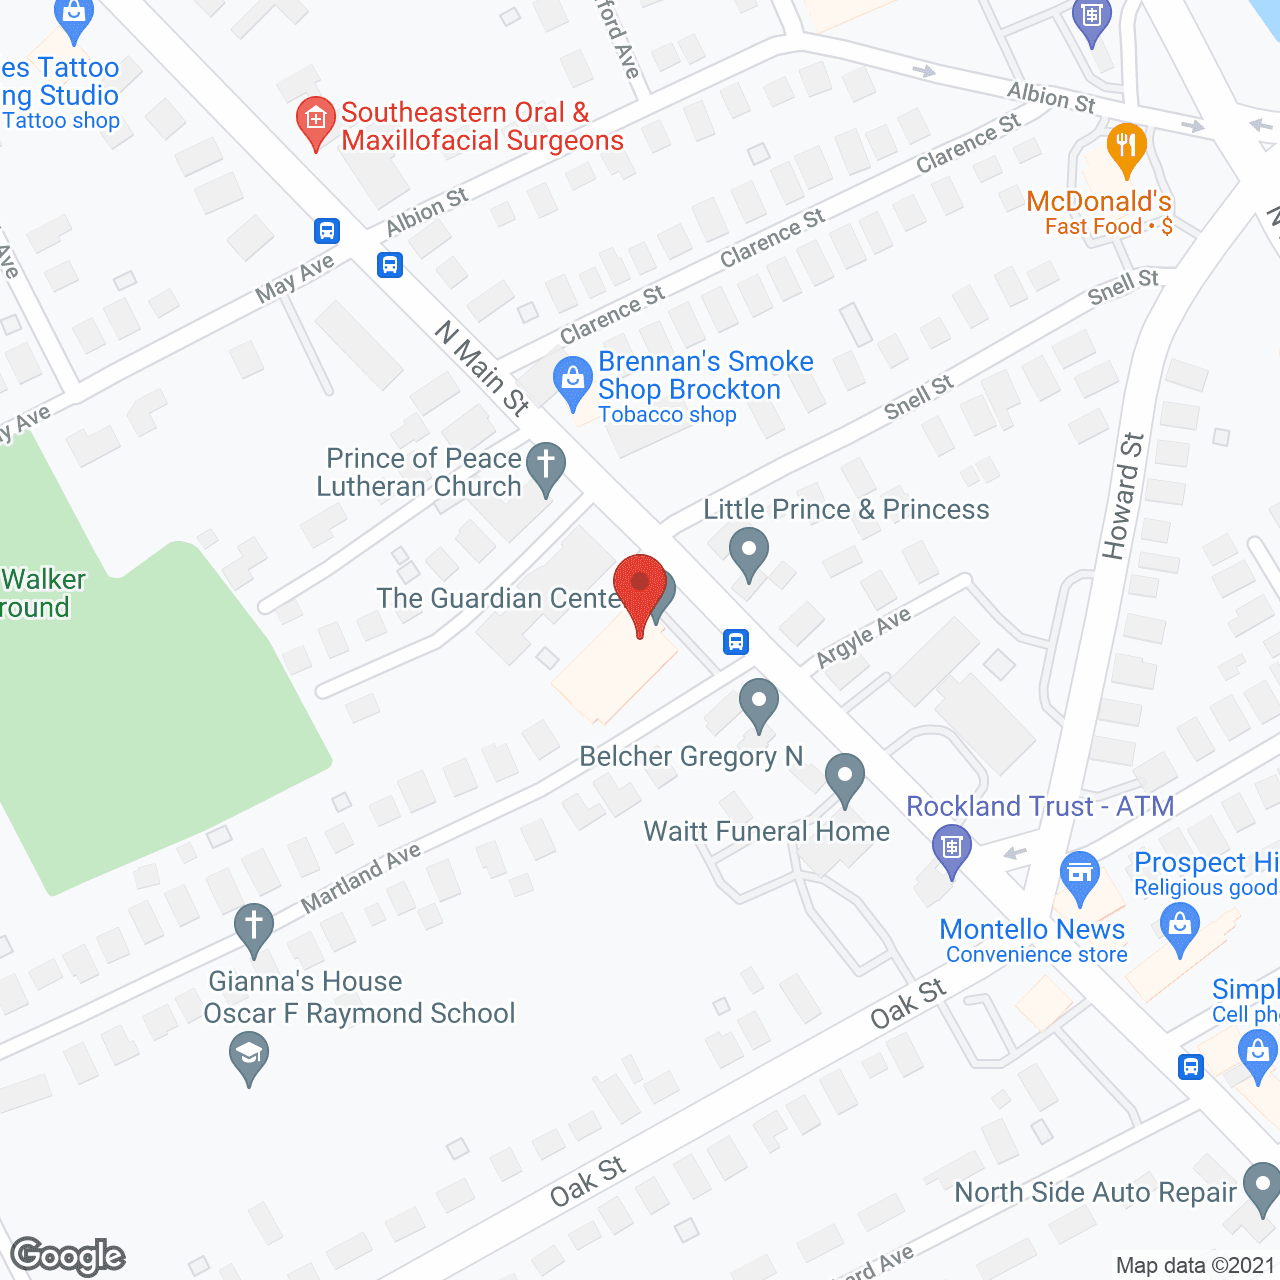 The Guardian Center in google map